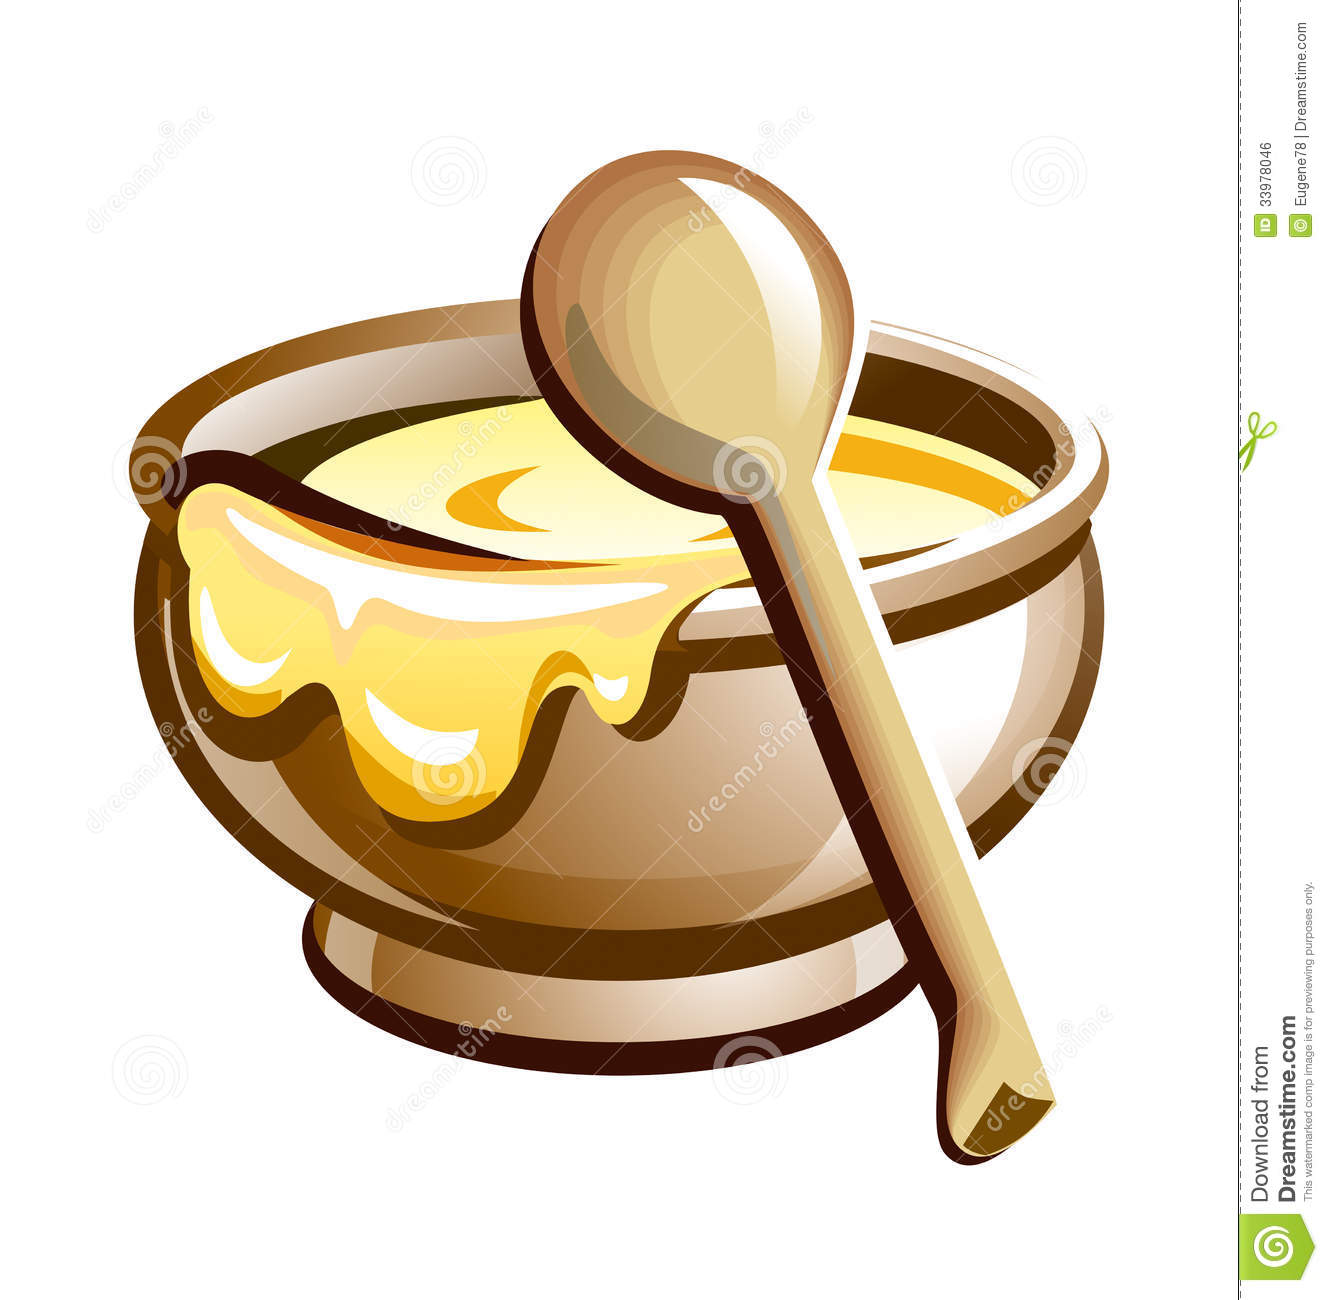 Porridge In The Pot With Wooden Spoon Royalty Free Stock Image   Image